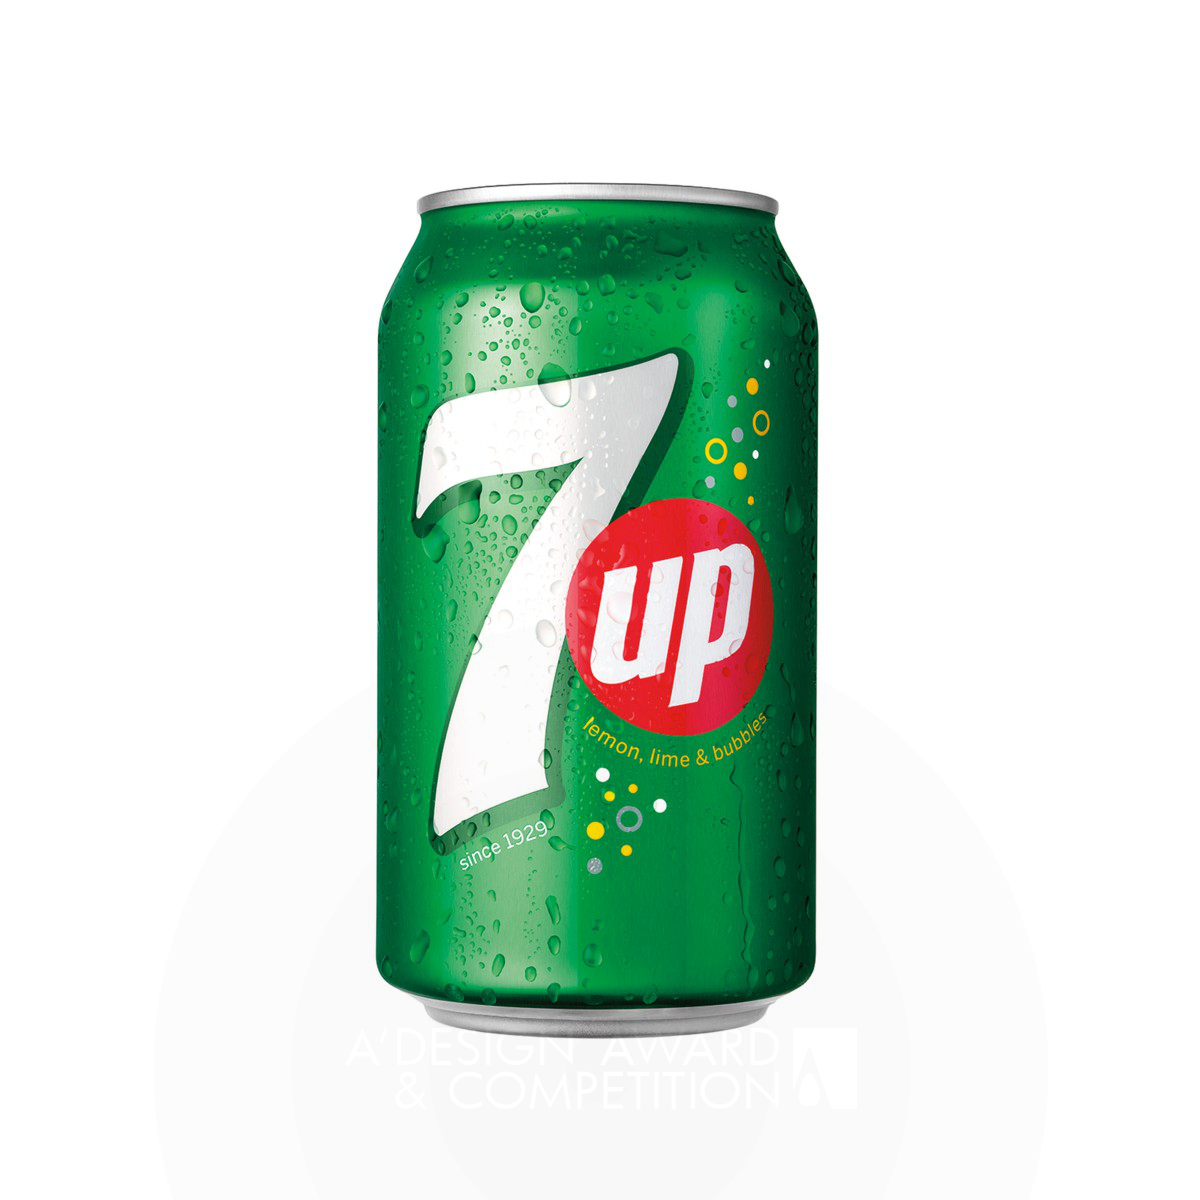 7UP Global VIS Redesign <b>Visual Identity System